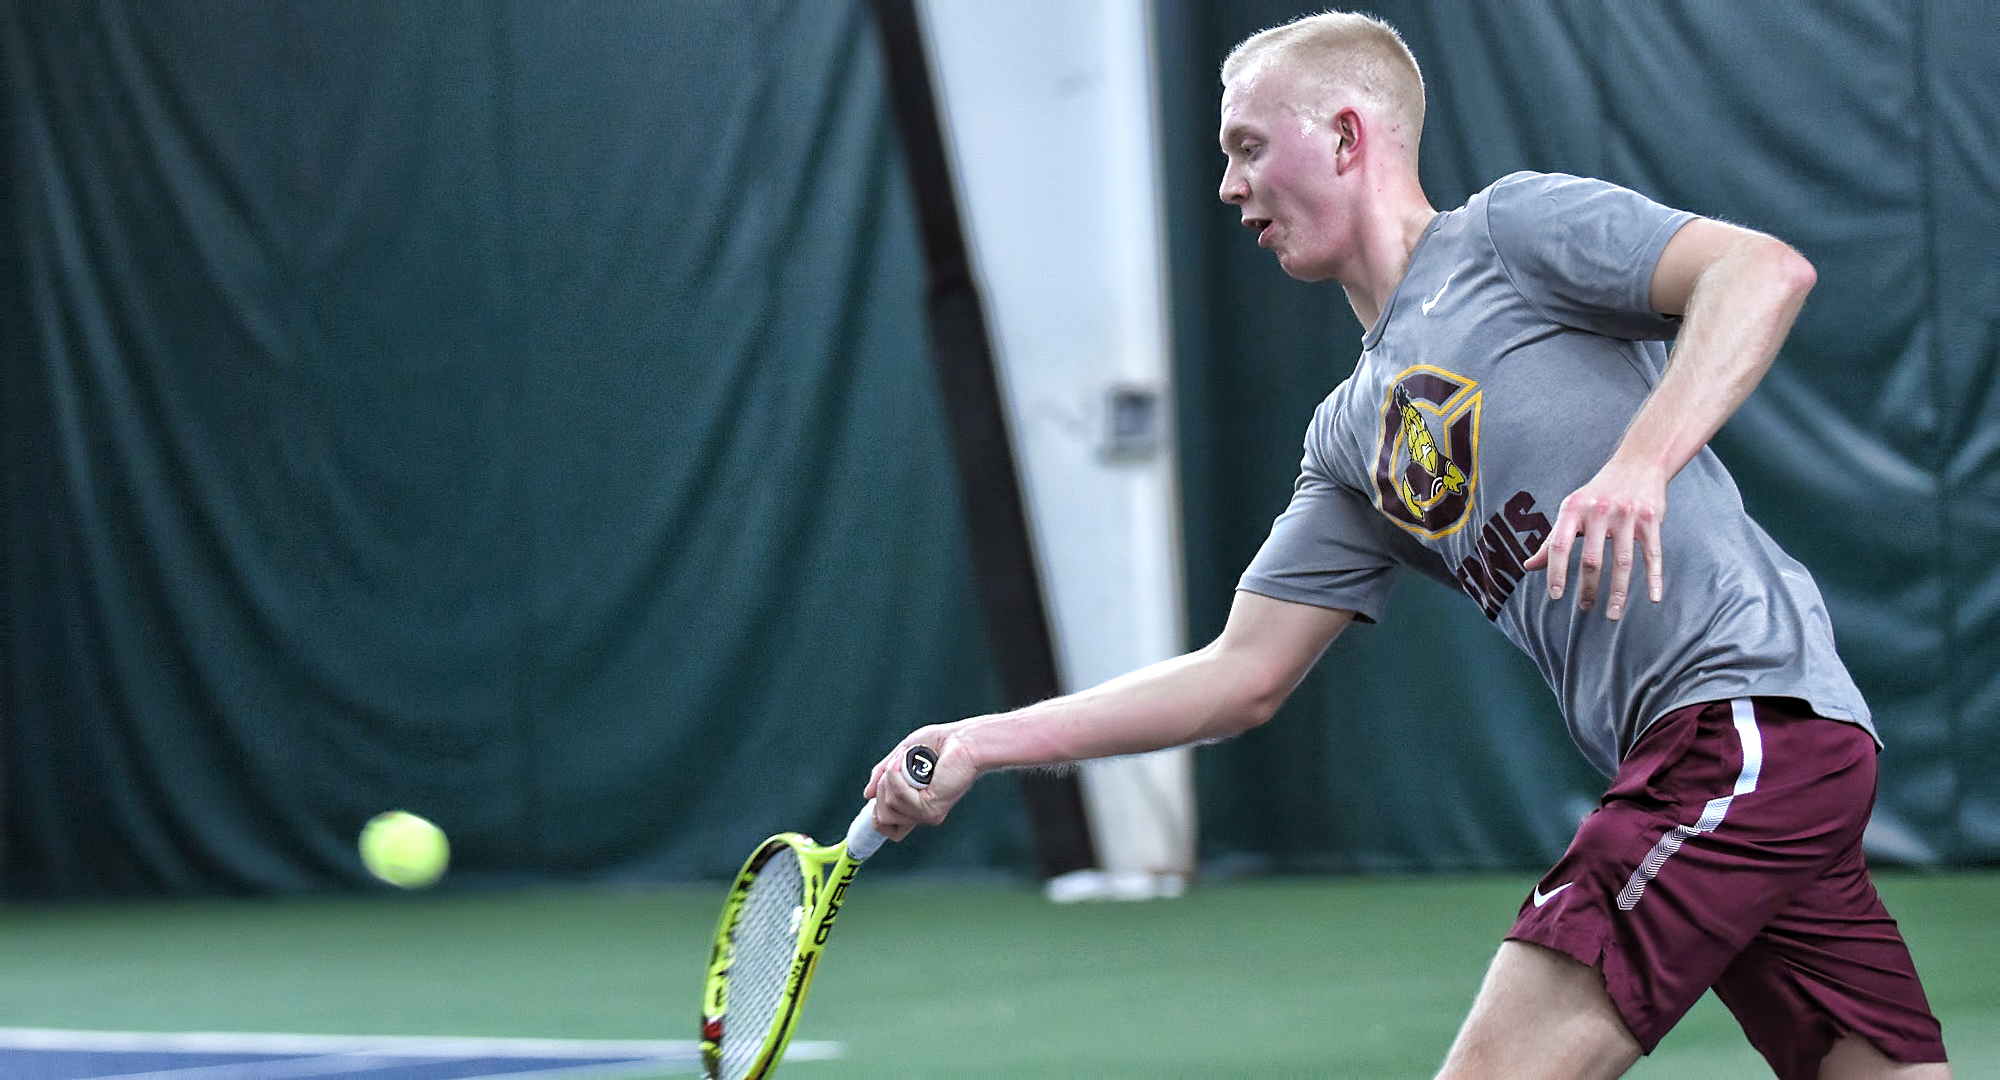 Junior Jared Saue won both his doubles and singles matches against St. Olaf and finished the year with a team-leading 12 singles wins.